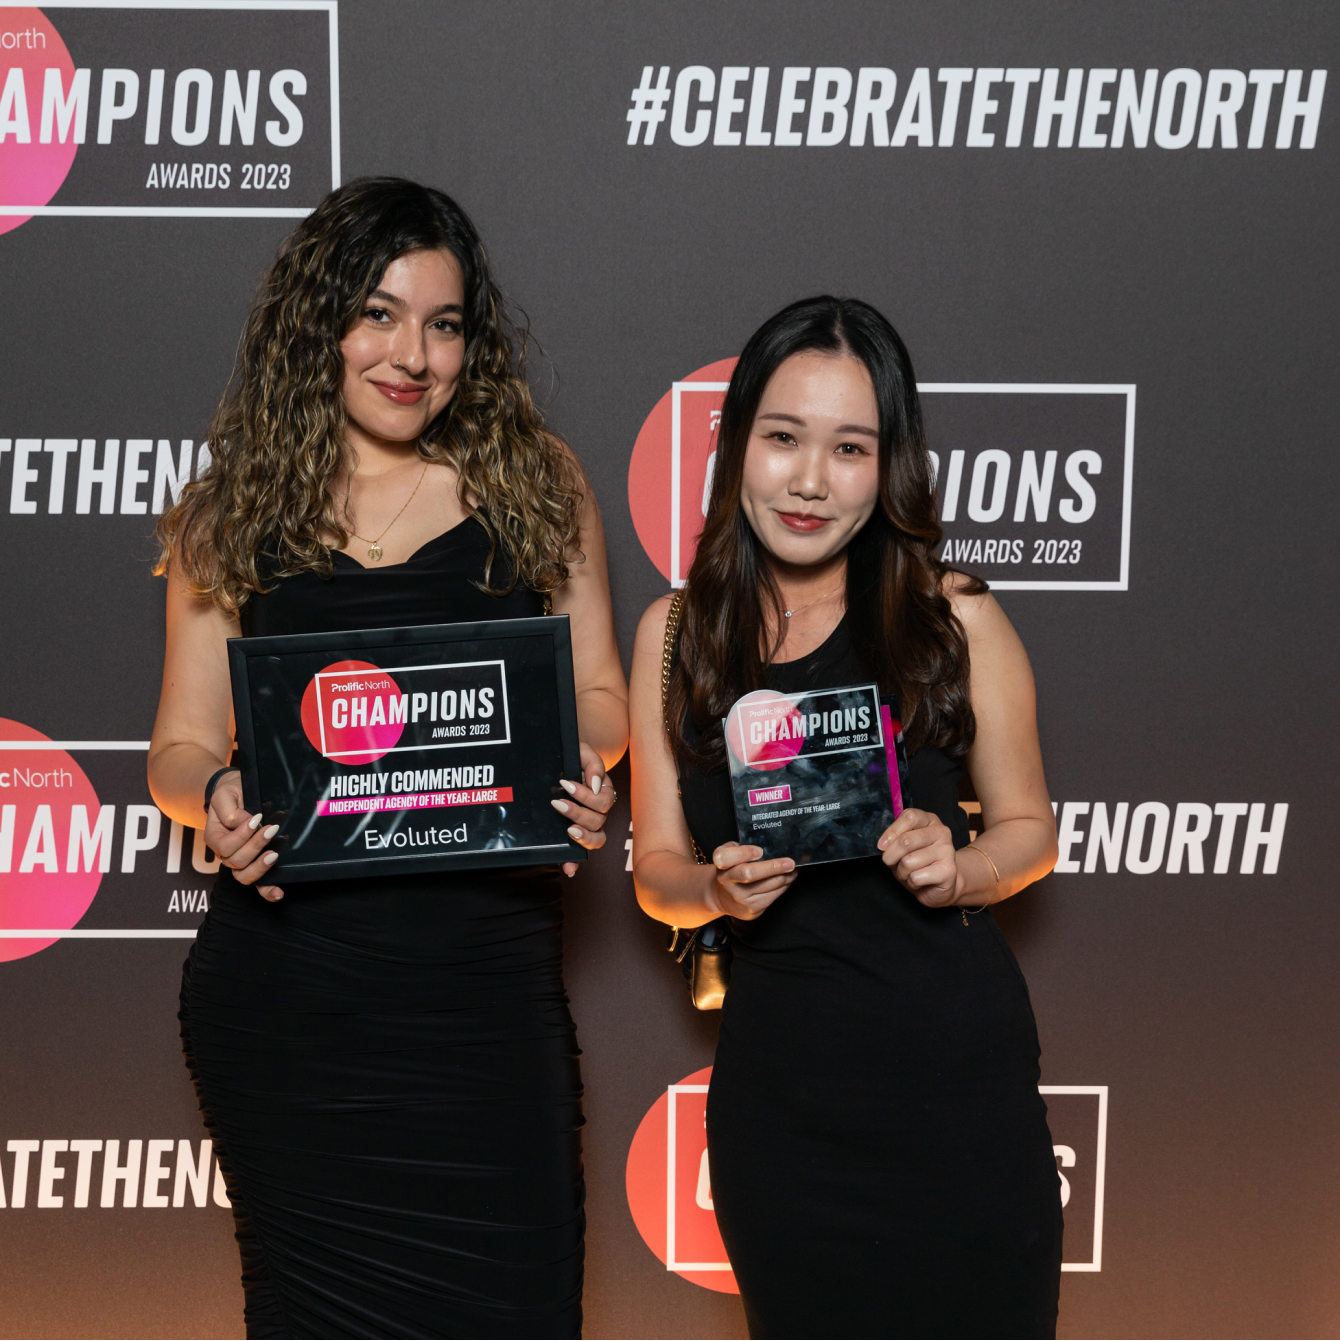 Evoluted's Amber Mukerker and Joyce Lee with Prolific North Champions Awards trophies